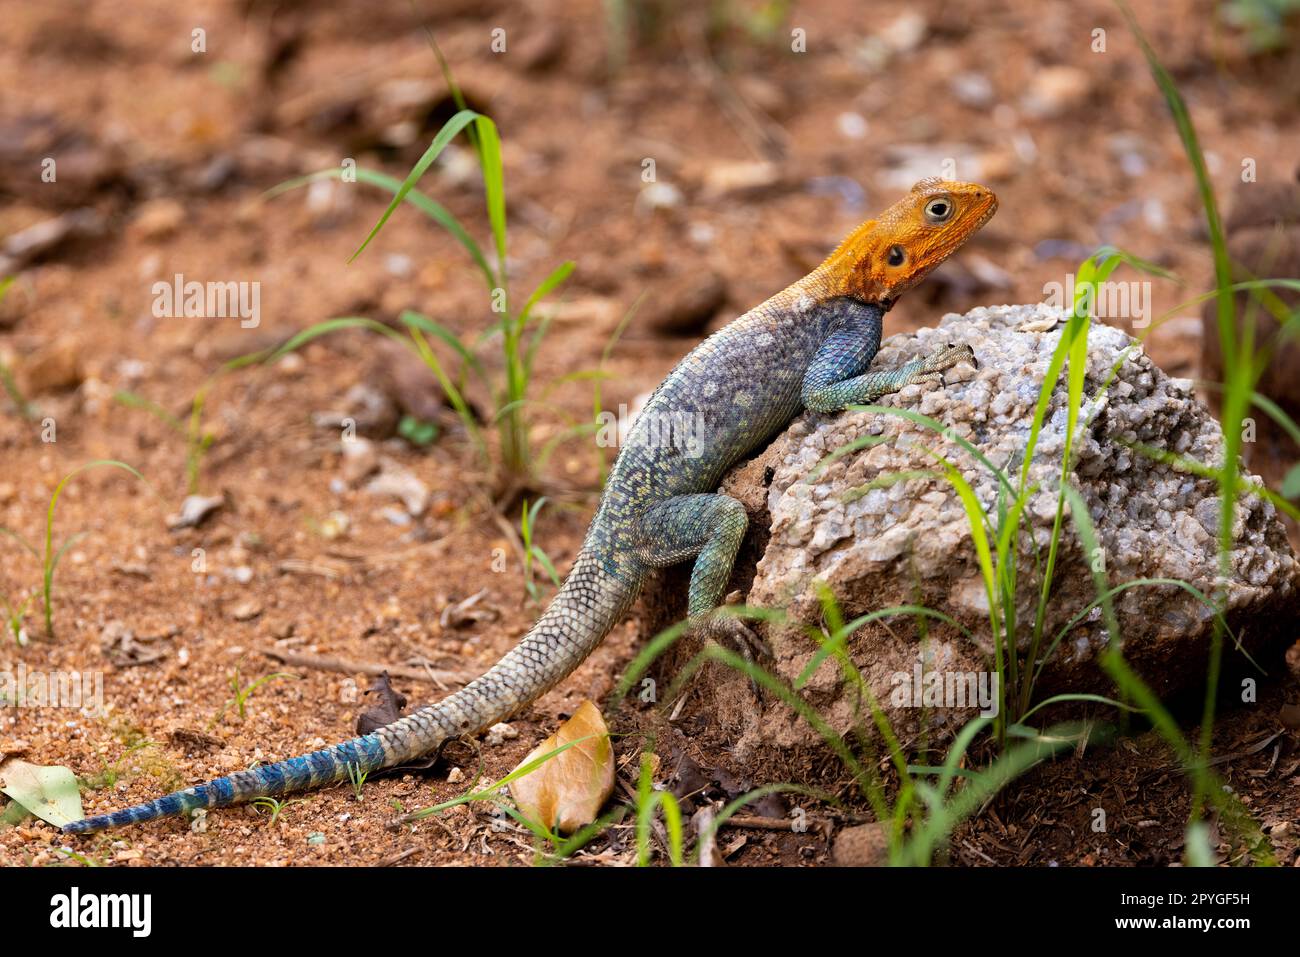 This photo showcases the vibrant colors and unique features of the agama lizard as it basks in the sun on a rock in the Kenyan Tsavo East reserve. Its Stock Photo